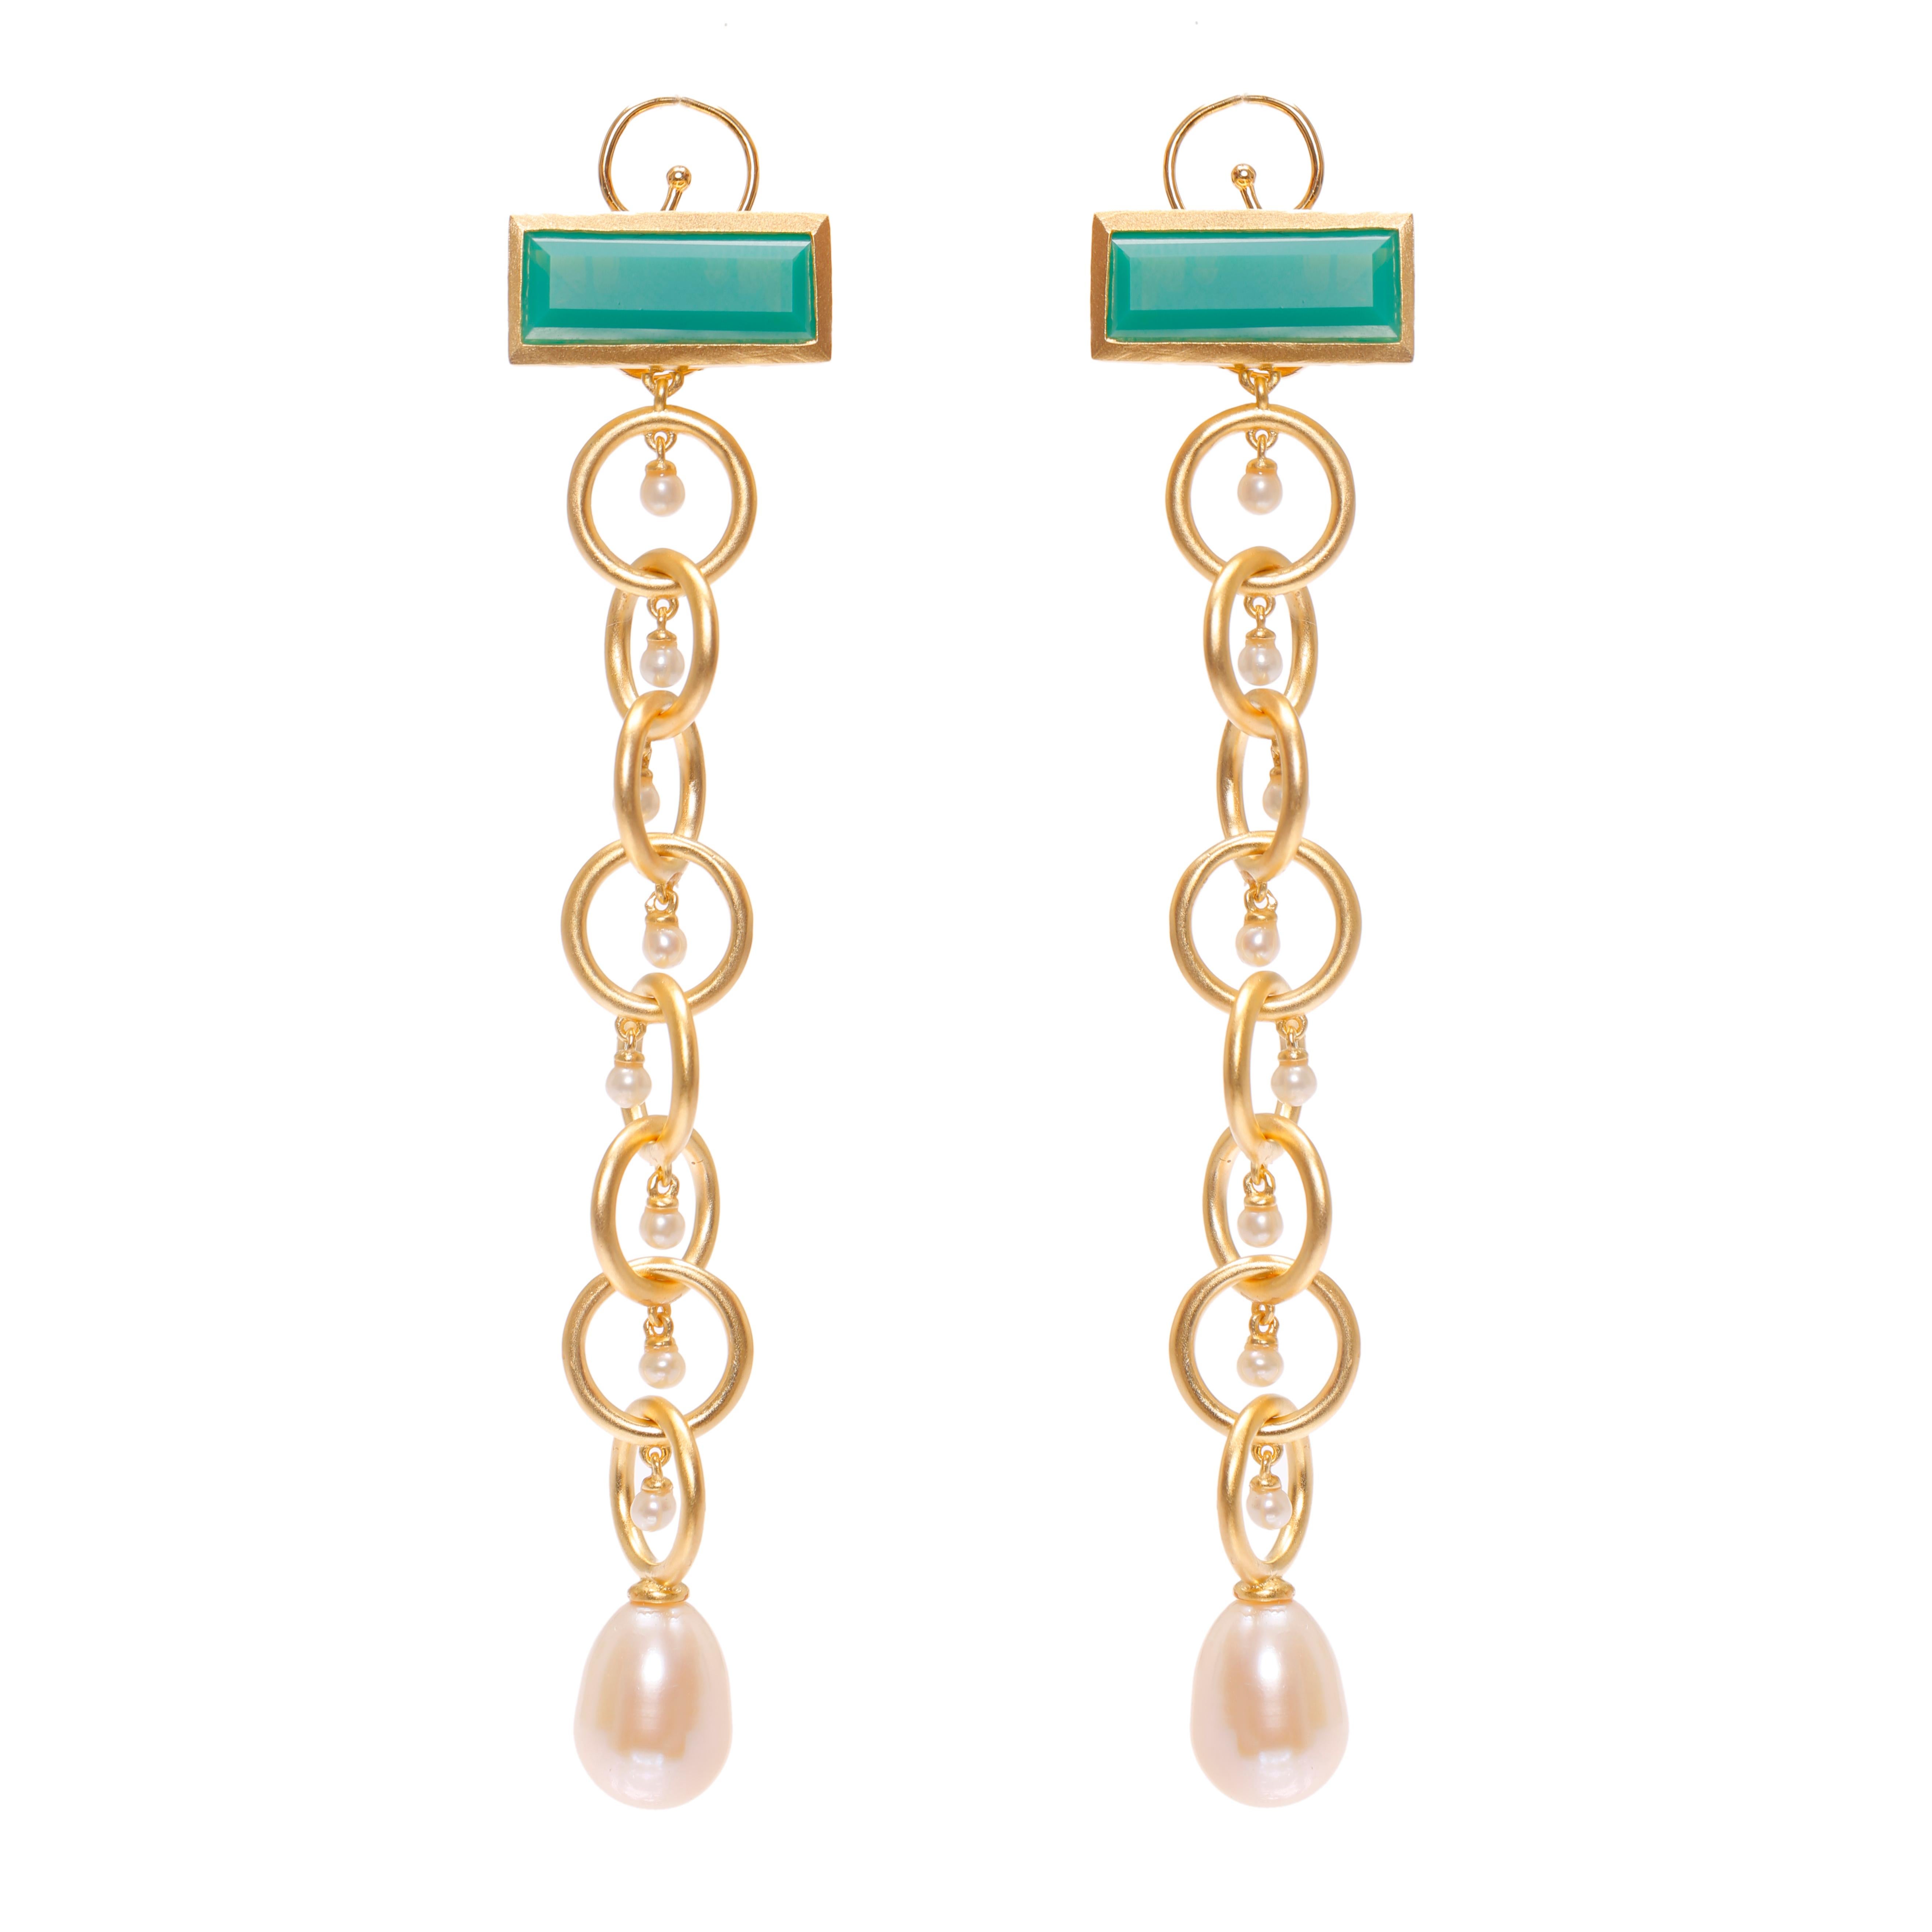 Ammanii Drop Earrings Vermeil Gold with Pearls and Green Chrysoprase